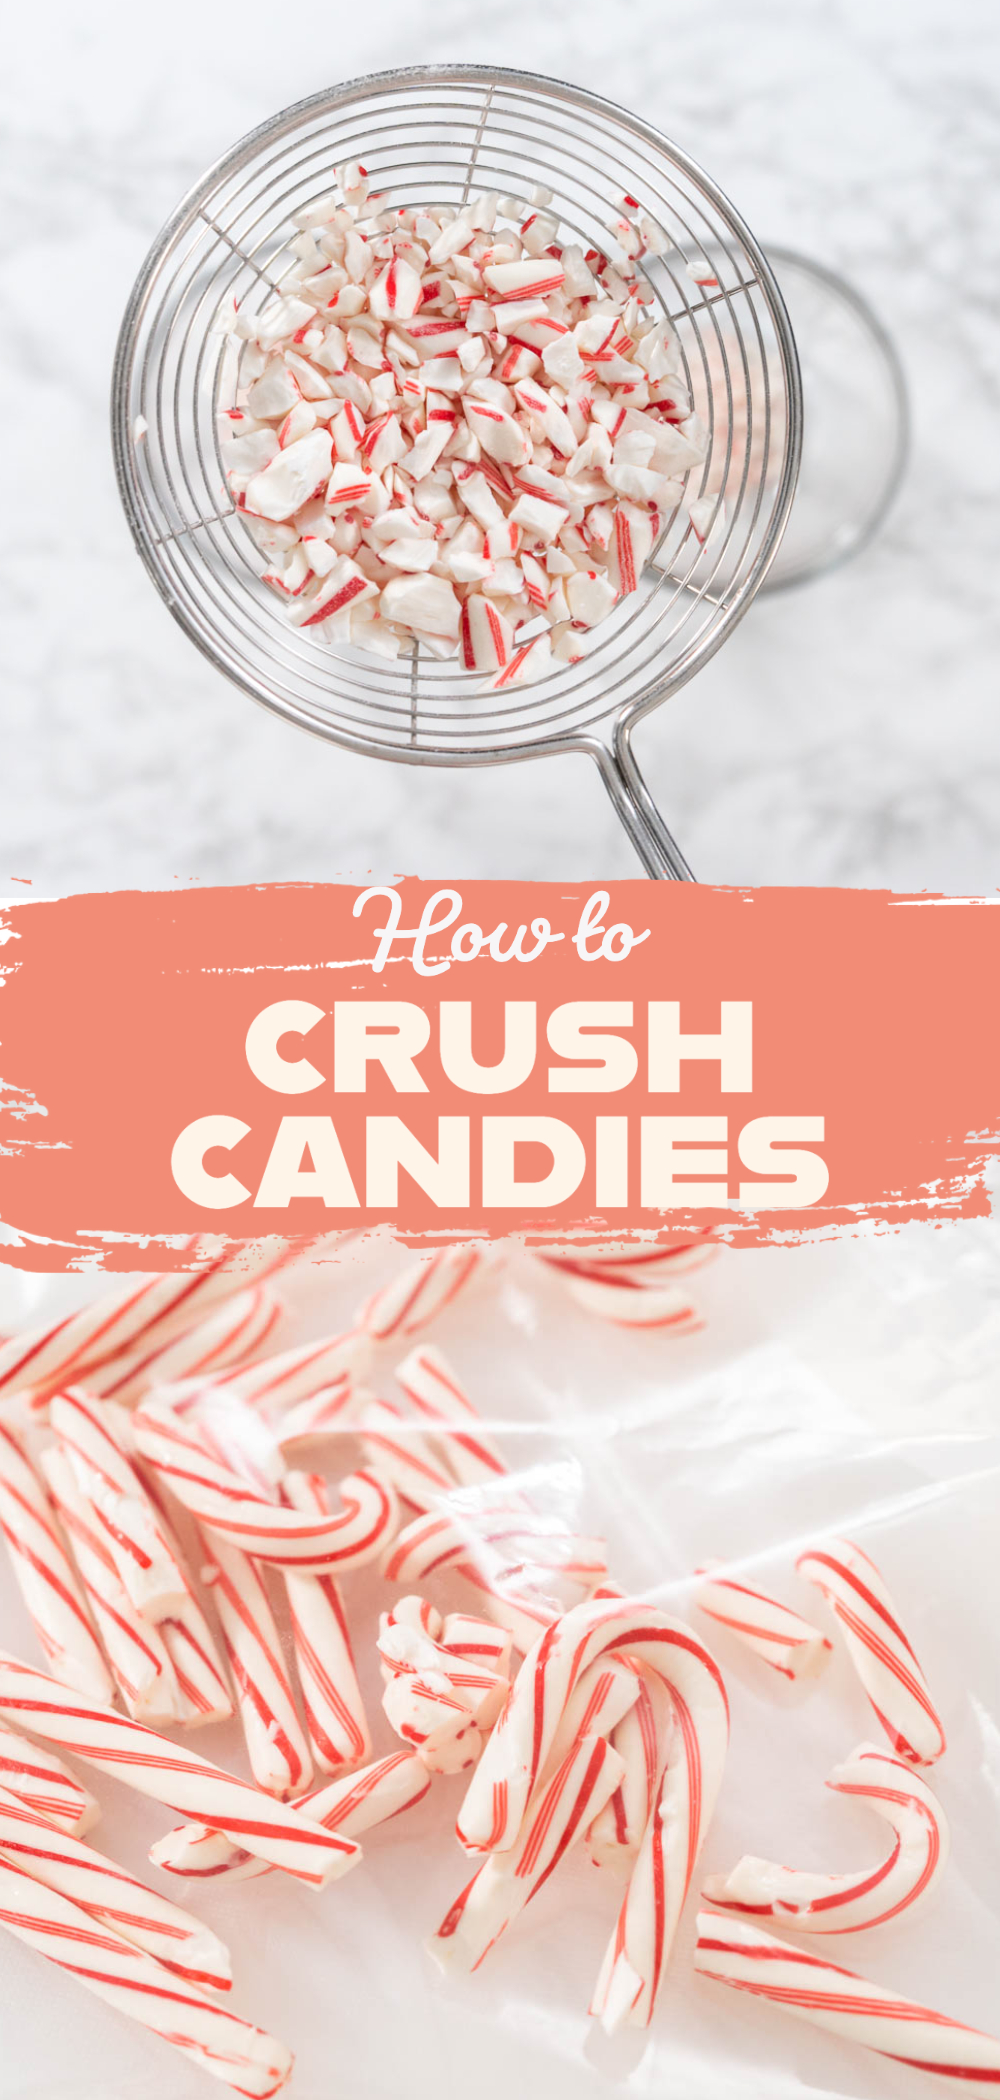 How to Crush Candies